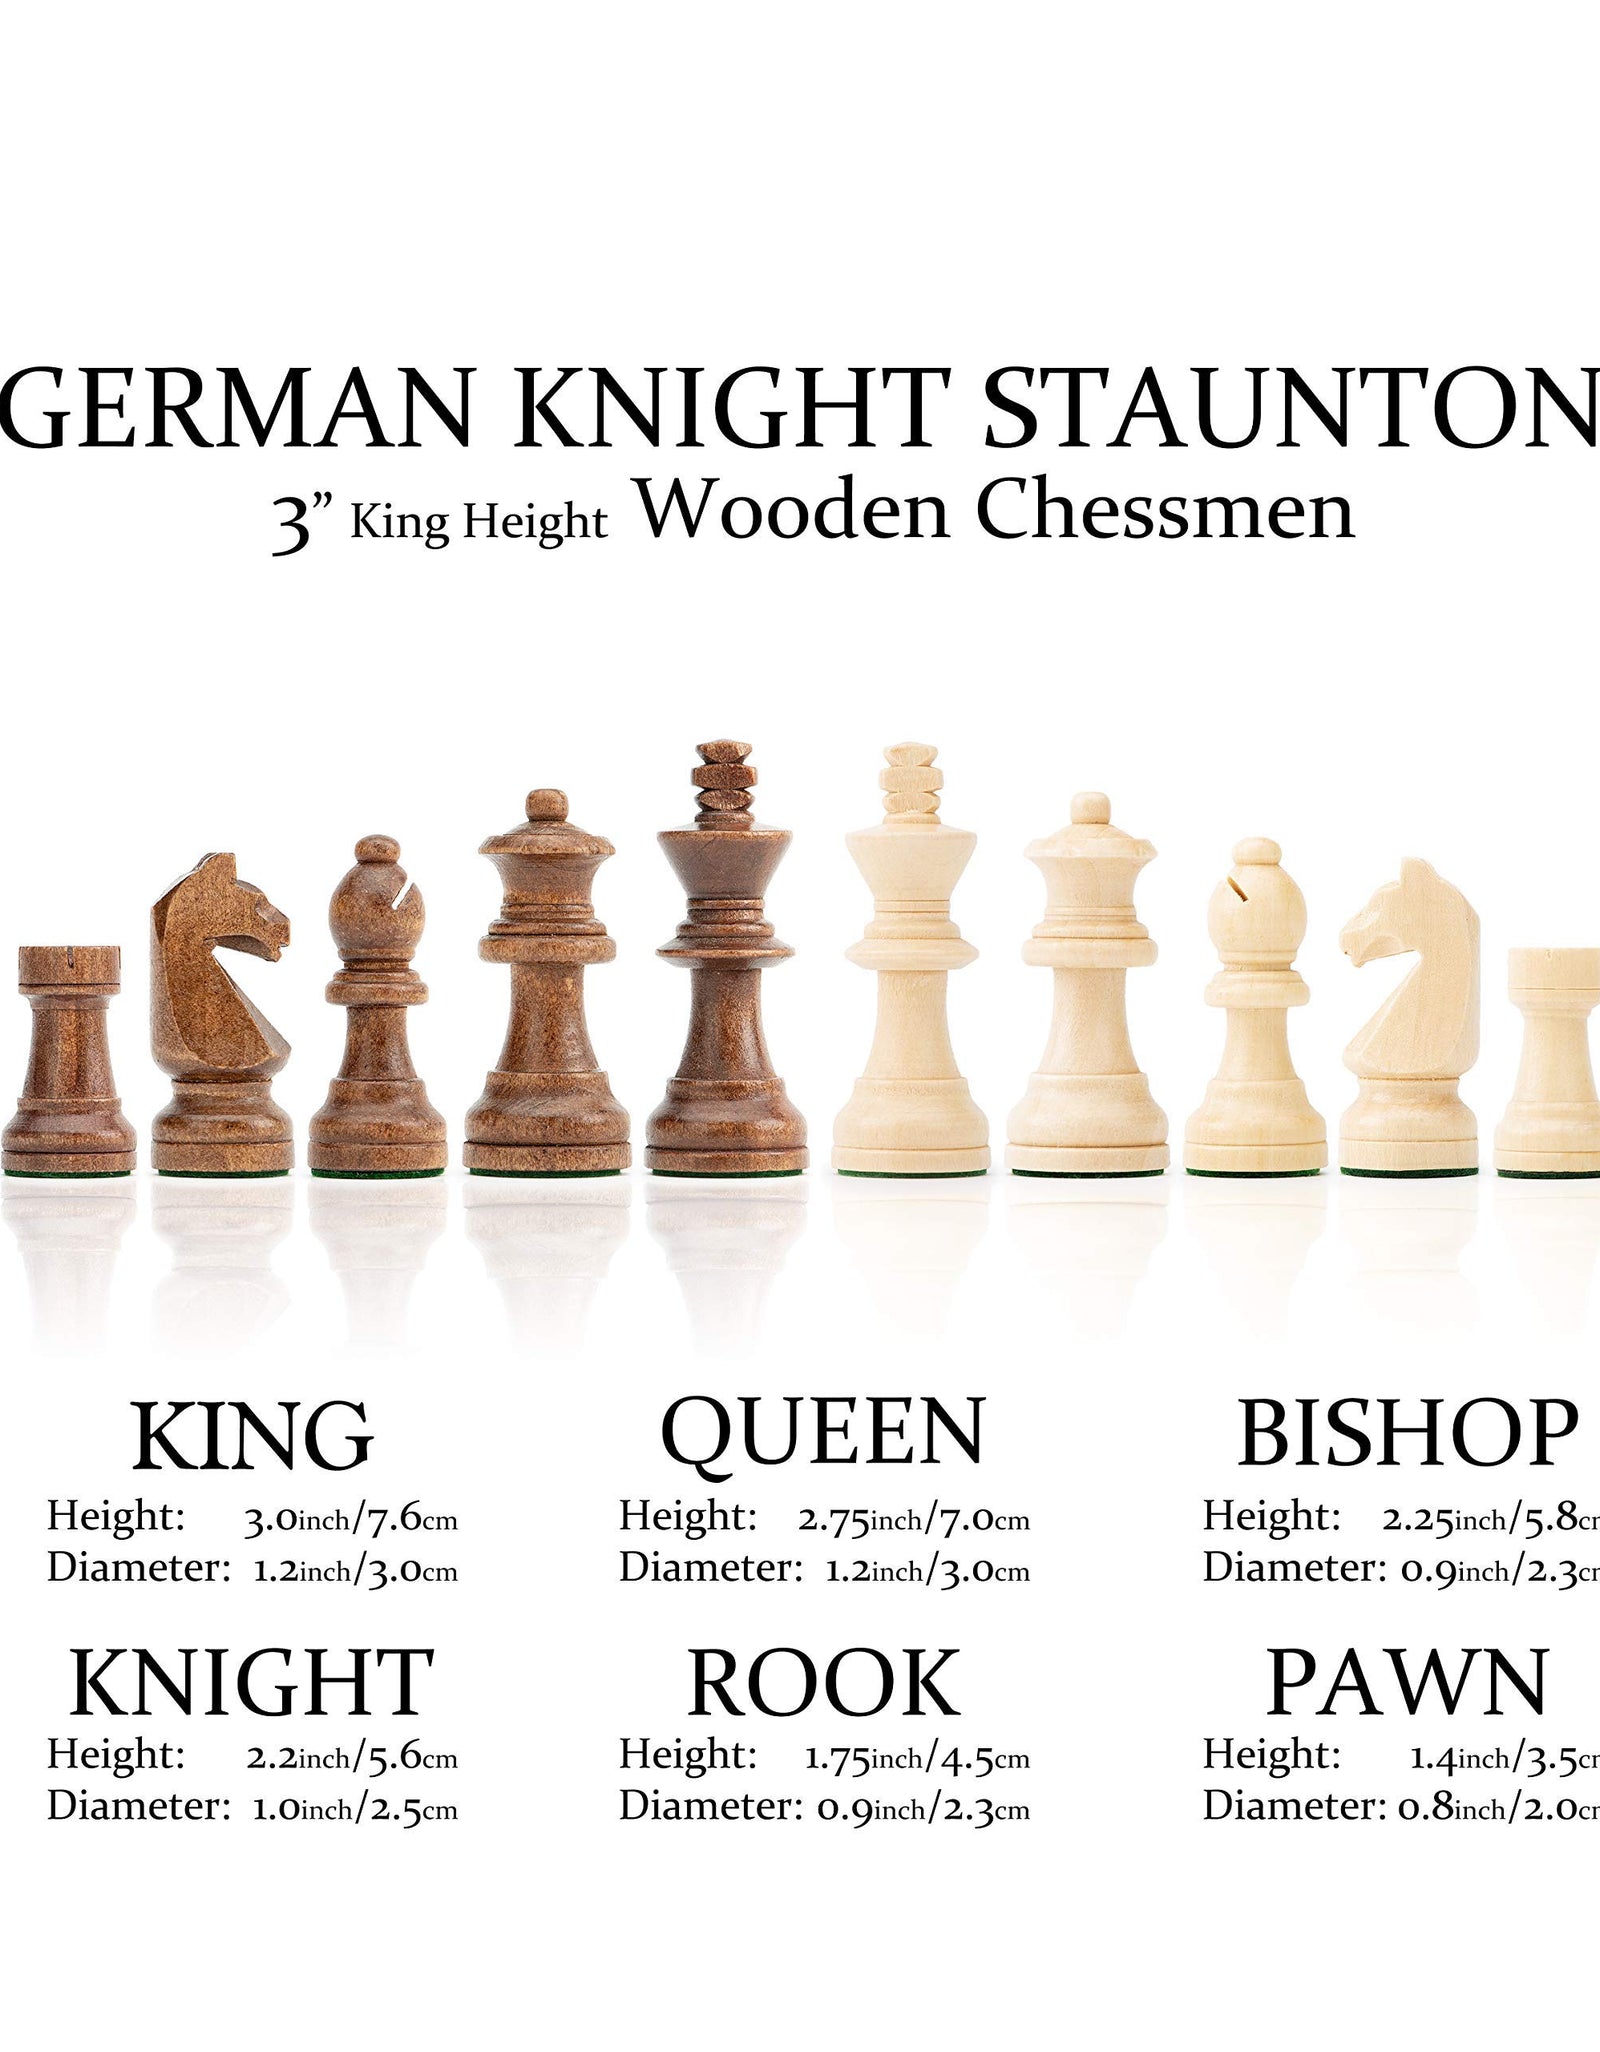 A&A 15" WOODEN CHESS & CHECKERS / Storage Drawer / 3" King Height German Knight Staunton Chess Pieces / Walnut Box w/Walnut & Maple Inlay / 2 Extra Queen / Classic 2 in 1 Board Games